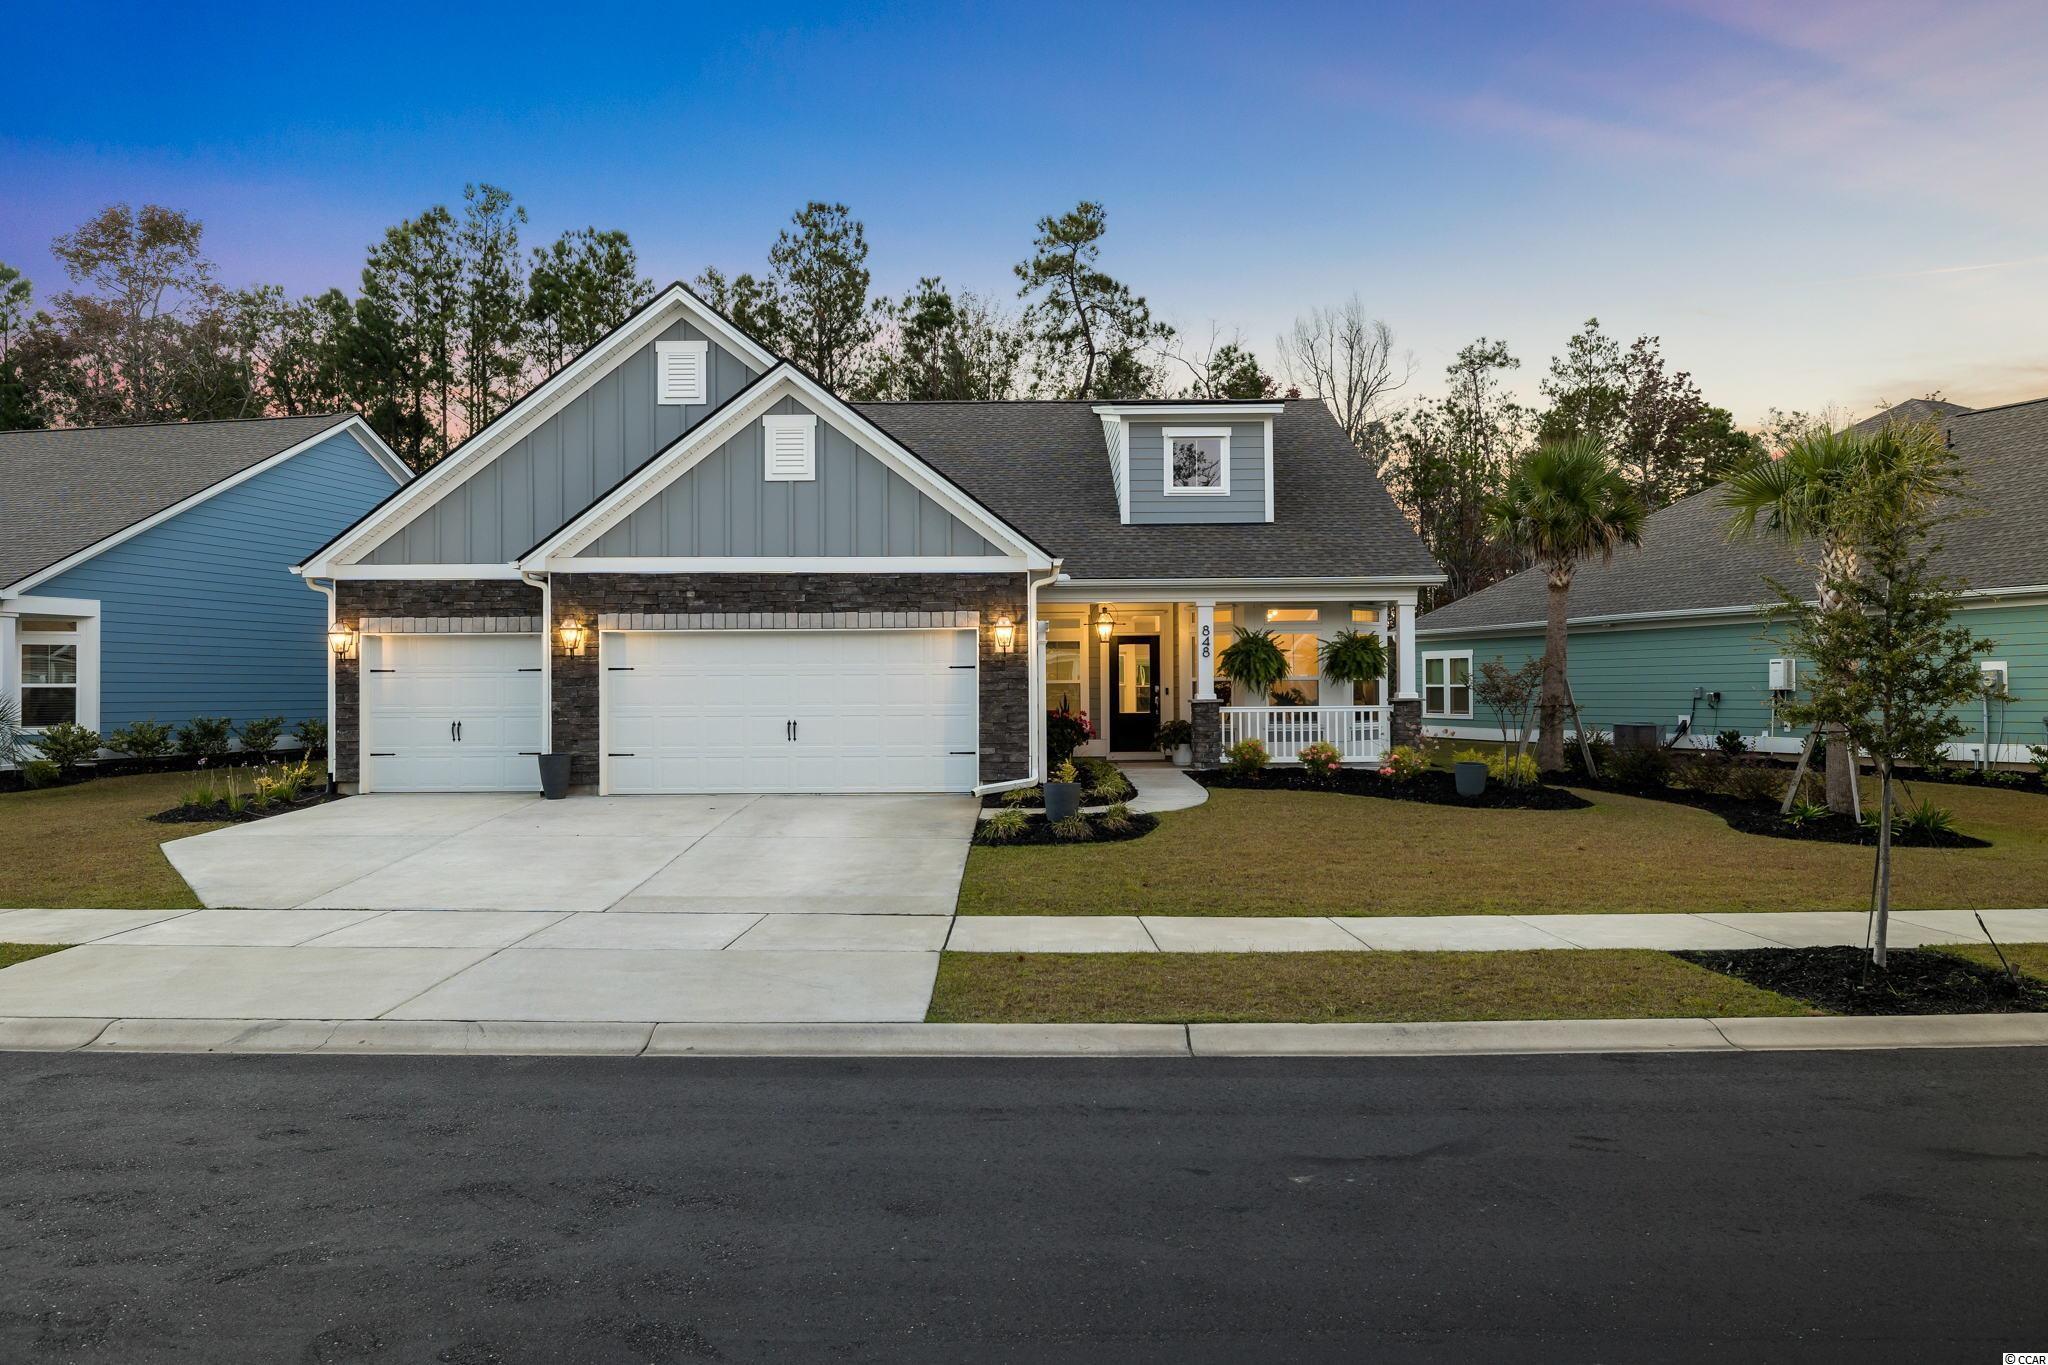 848 Mourning Dove Dr. Myrtle Beach, SC 29577